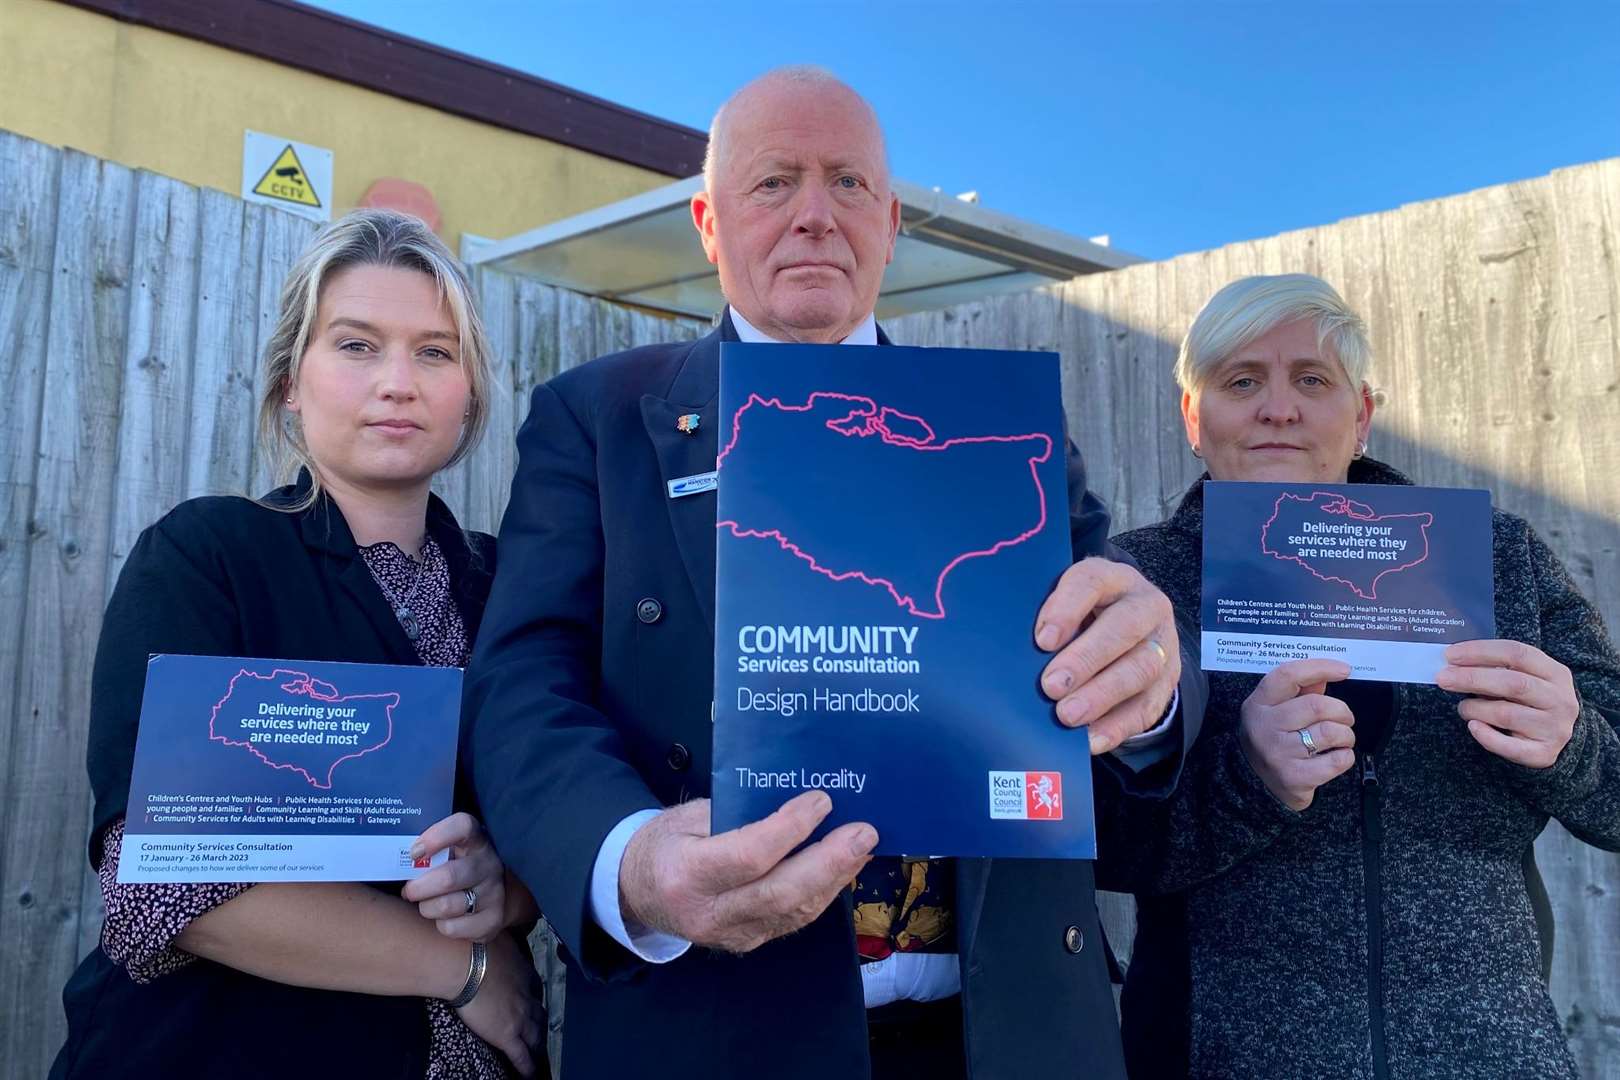 Clair Jones (left), Cllr Trevor Shonk (centre) and Kim Hammond (right) hold up the proposal documents that could lead to the closure of the Priory Children’s Centre site. Picture: Explorers Nursery / TEYP